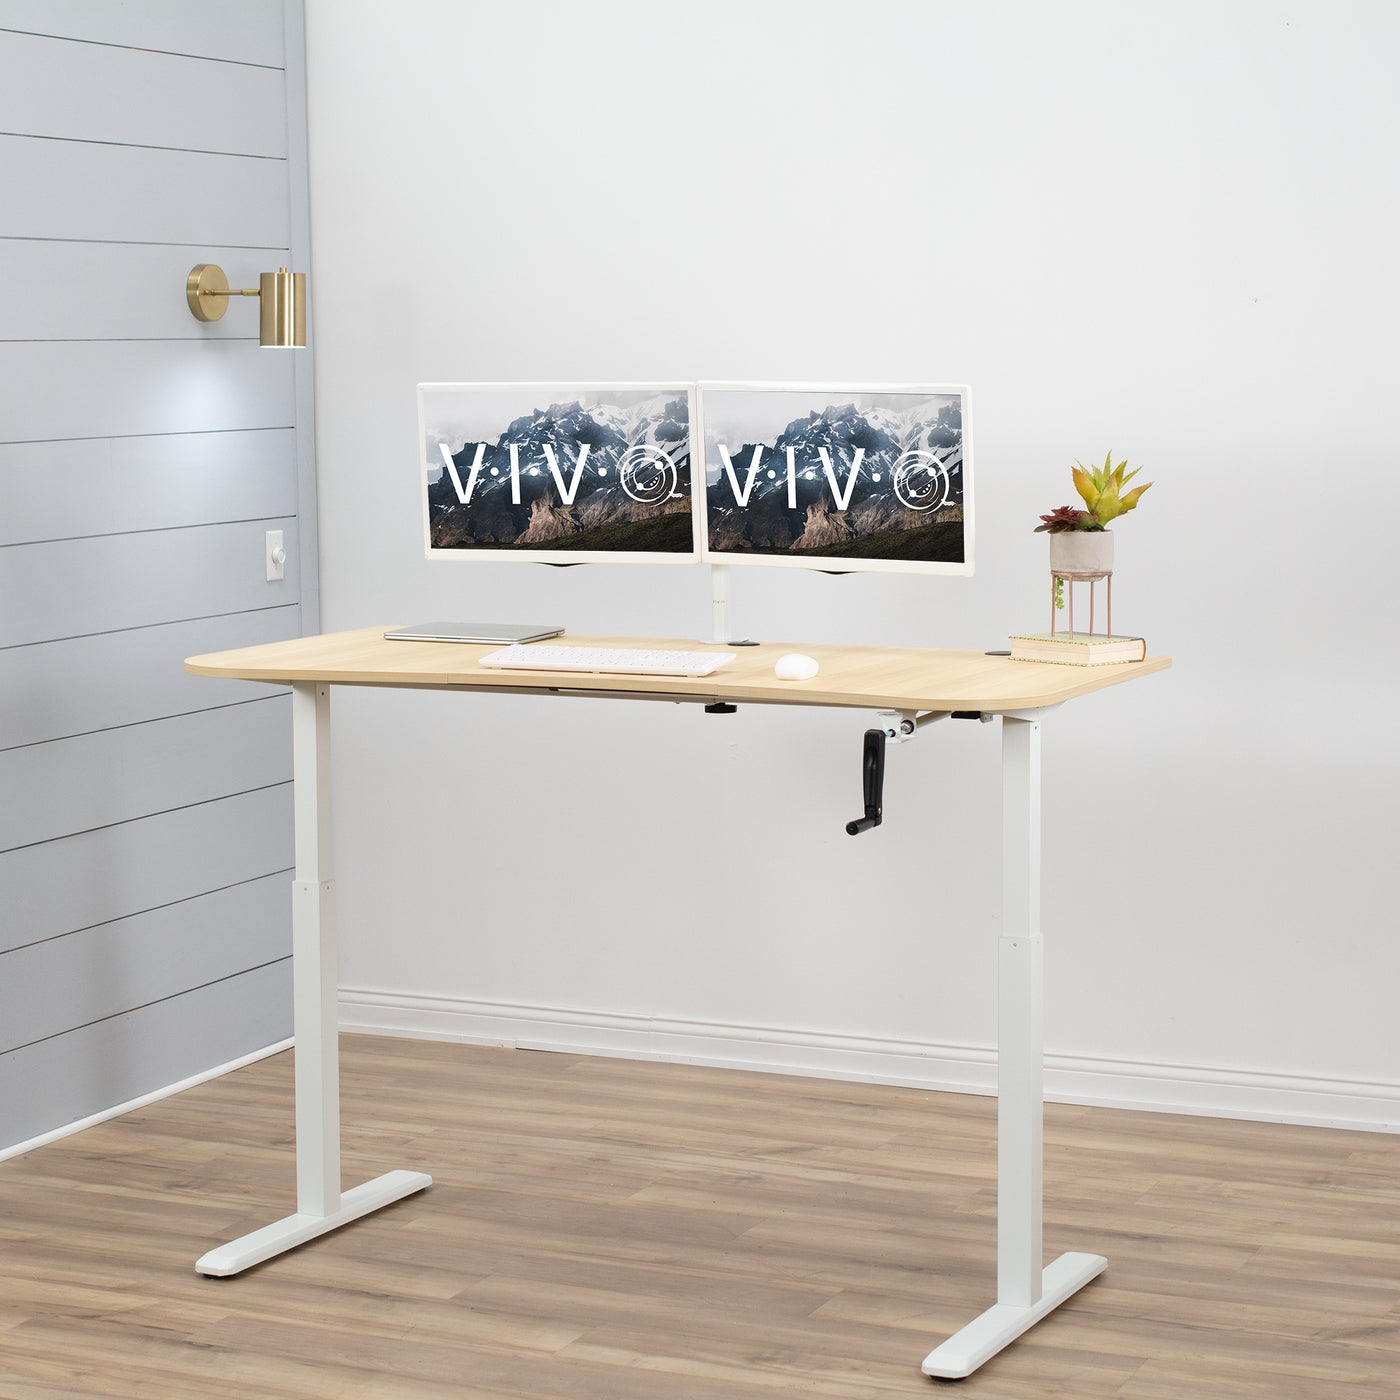 Sturdy manual hand crank height adjustable desk for sit or stand workstation.